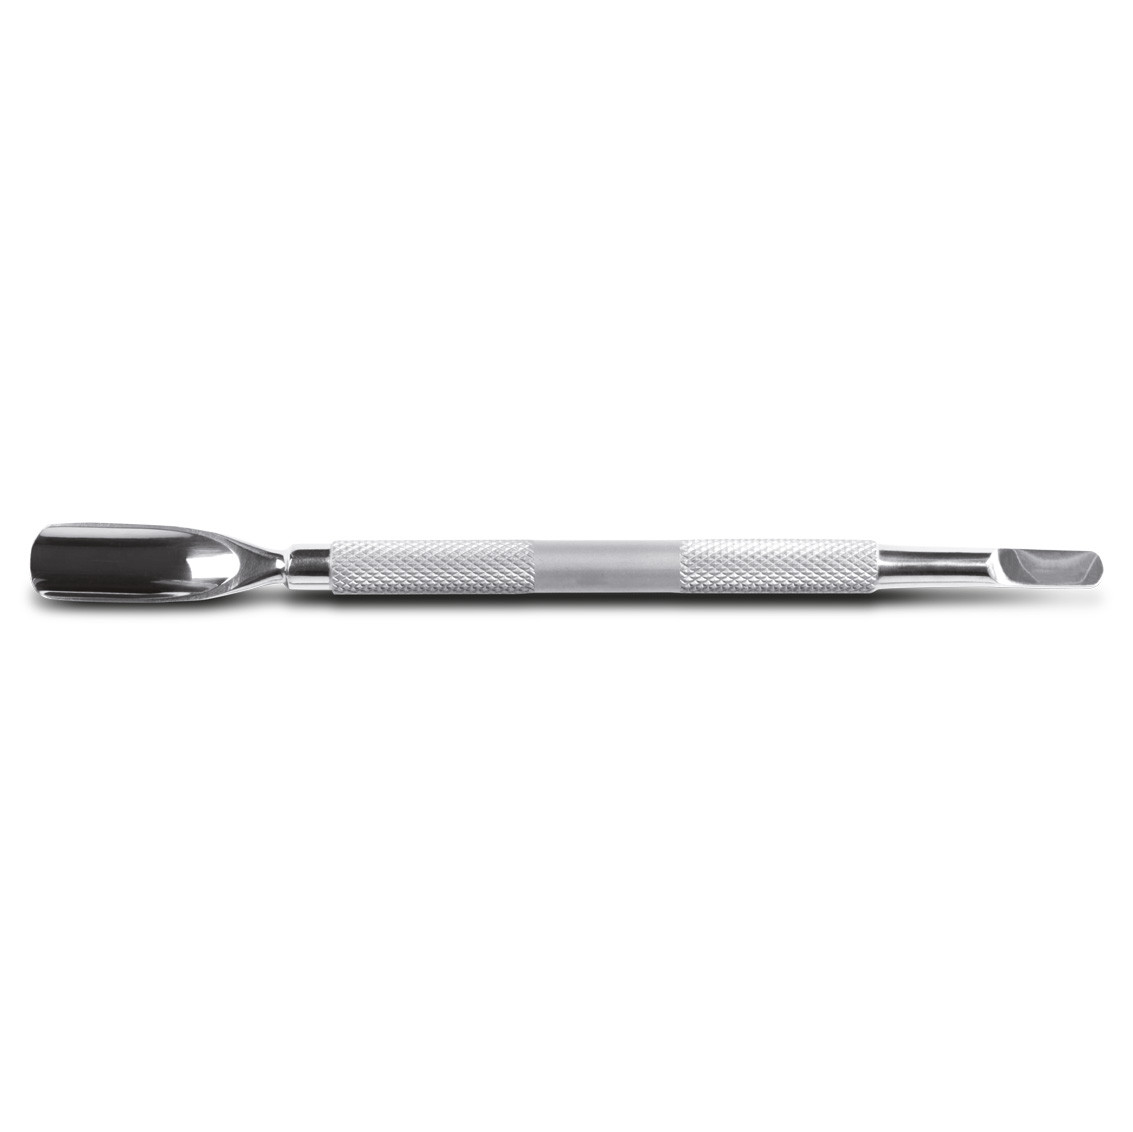 Professional stainless steel cuticle pusher with double concave and flat-rectangular tip